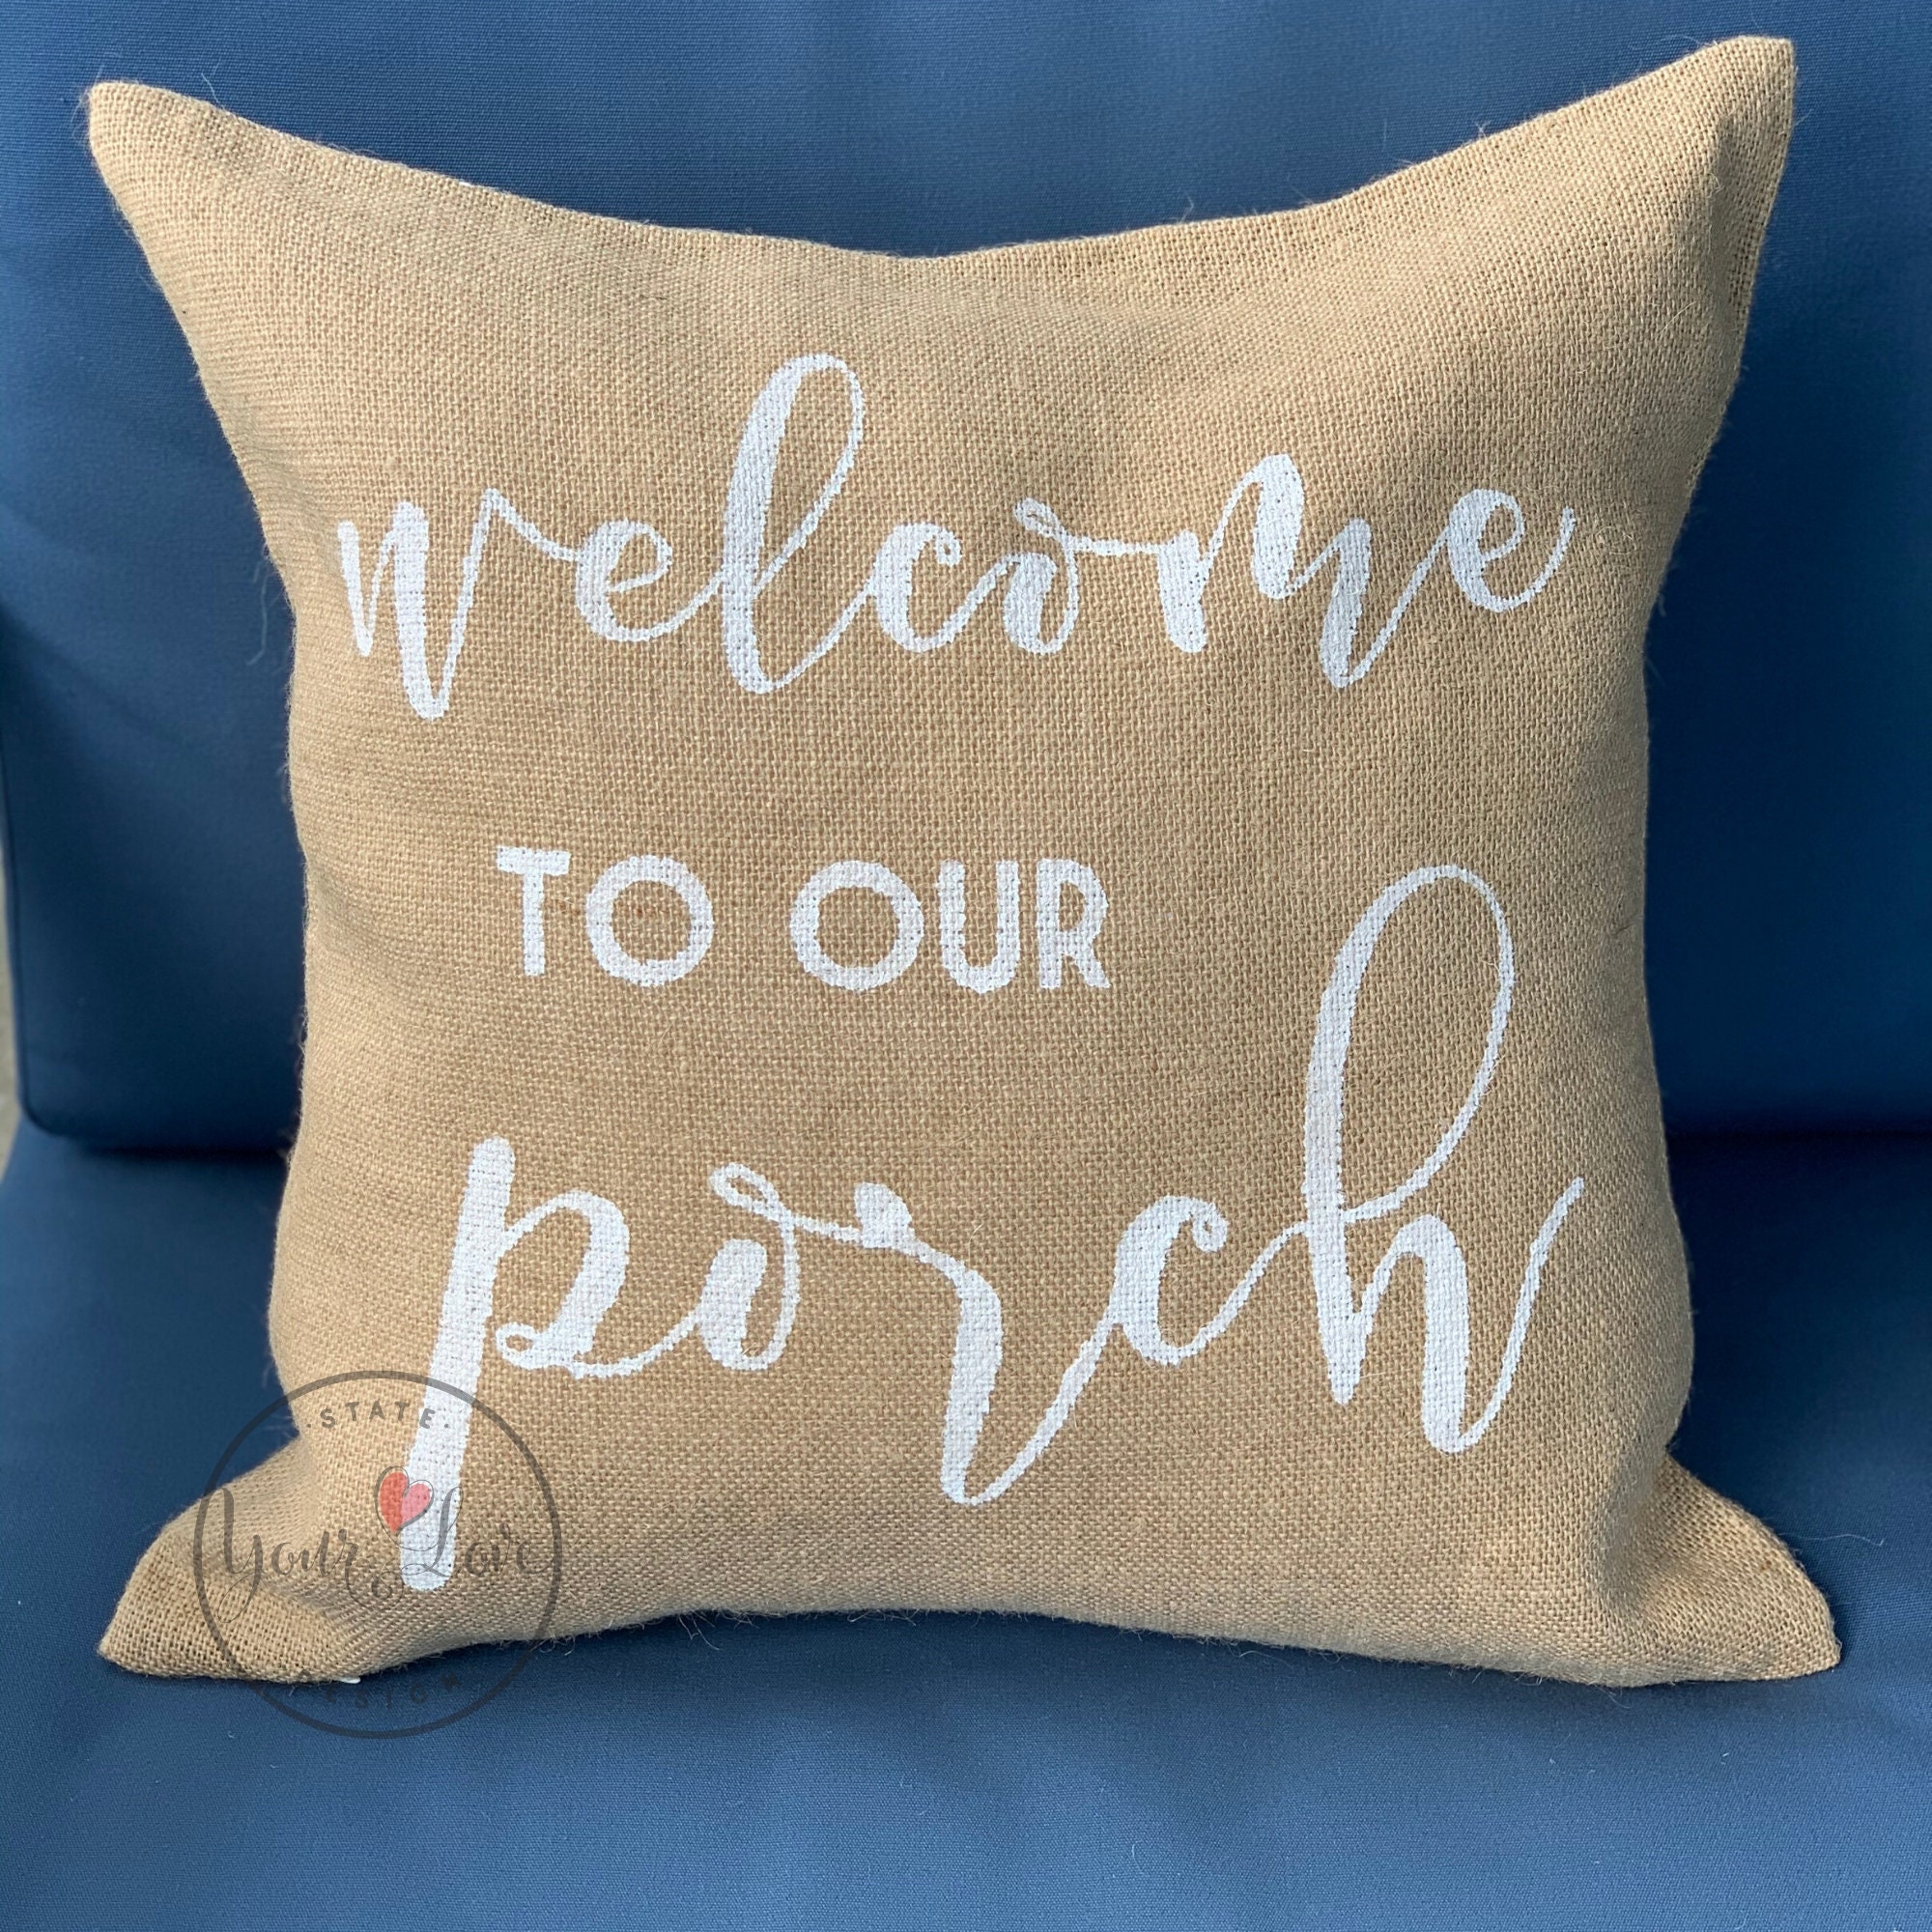 Burlap Throw Pillow Cover Welcome To The Porch